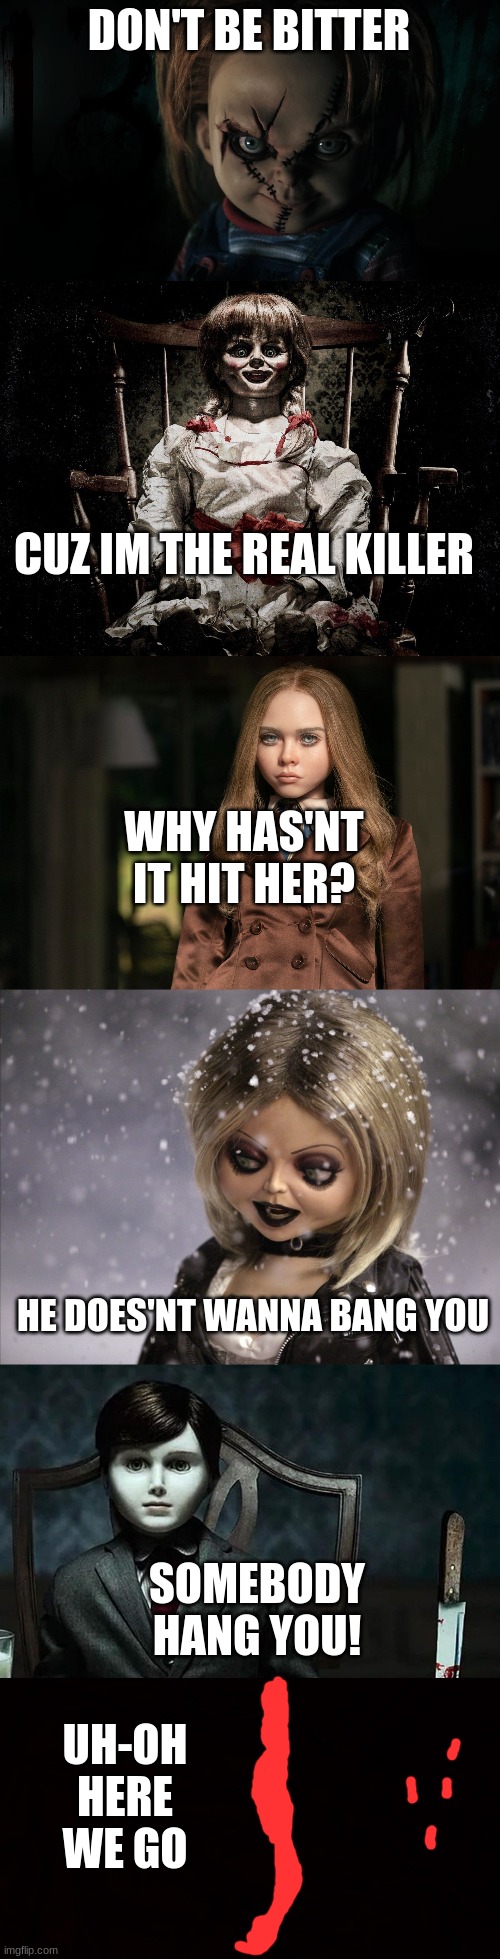 if all the killer dolls got into a fight | DON'T BE BITTER; CUZ IM THE REAL KILLER; WHY HAS'NT IT HIT HER? HE DOES'NT WANNA BANG YOU; SOMEBODY HANG YOU! UH-OH HERE WE GO | image tagged in chucky,annabelle,memes,tiffany | made w/ Imgflip meme maker